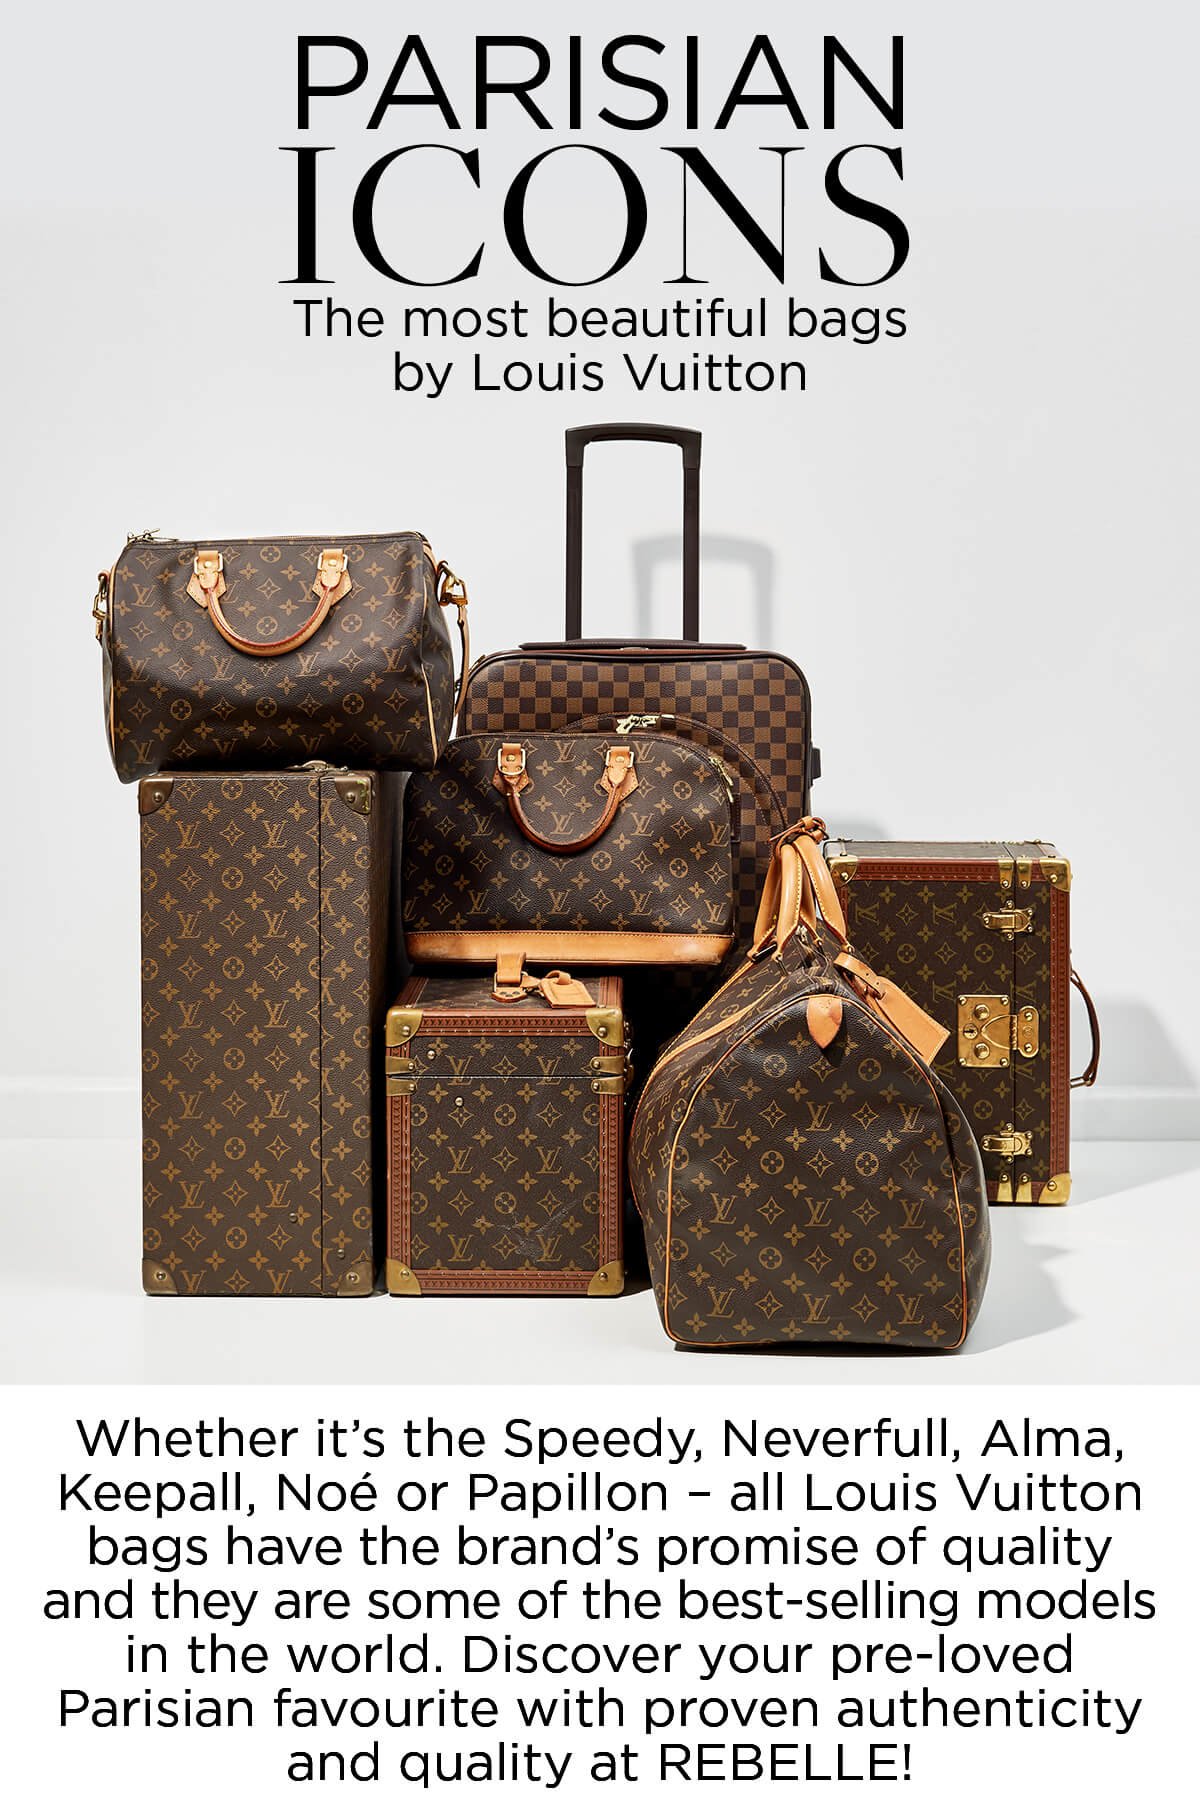 Louis Vuitton vintage monceau two way bag wear throughout and the